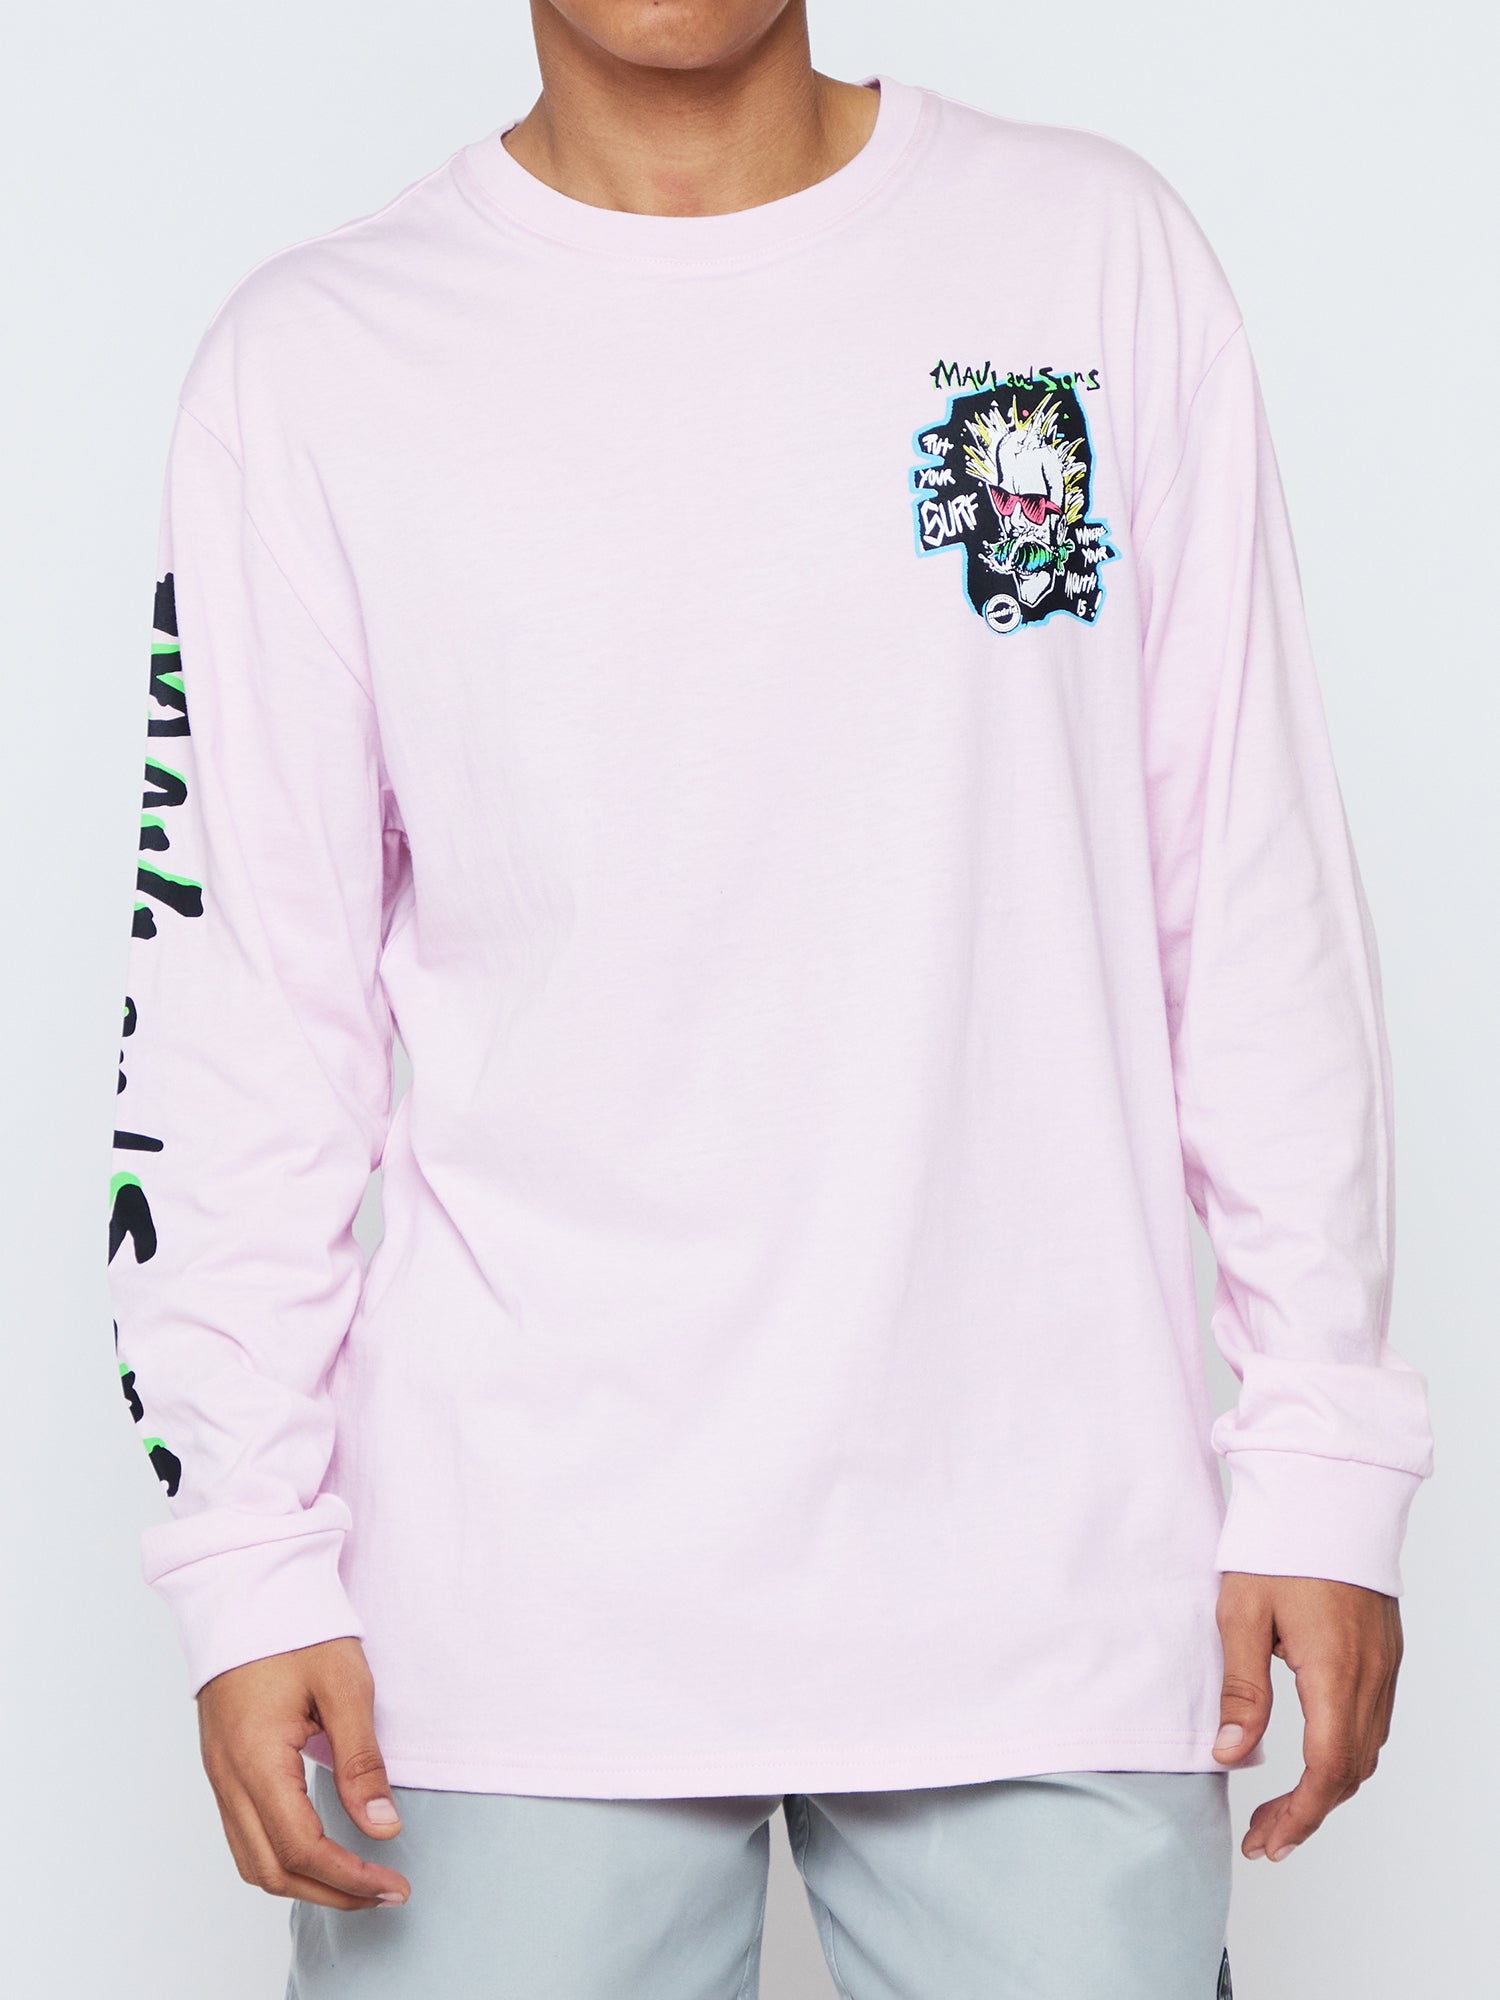 Maui and Sons x Madrid Srfmouth Long Sleeve